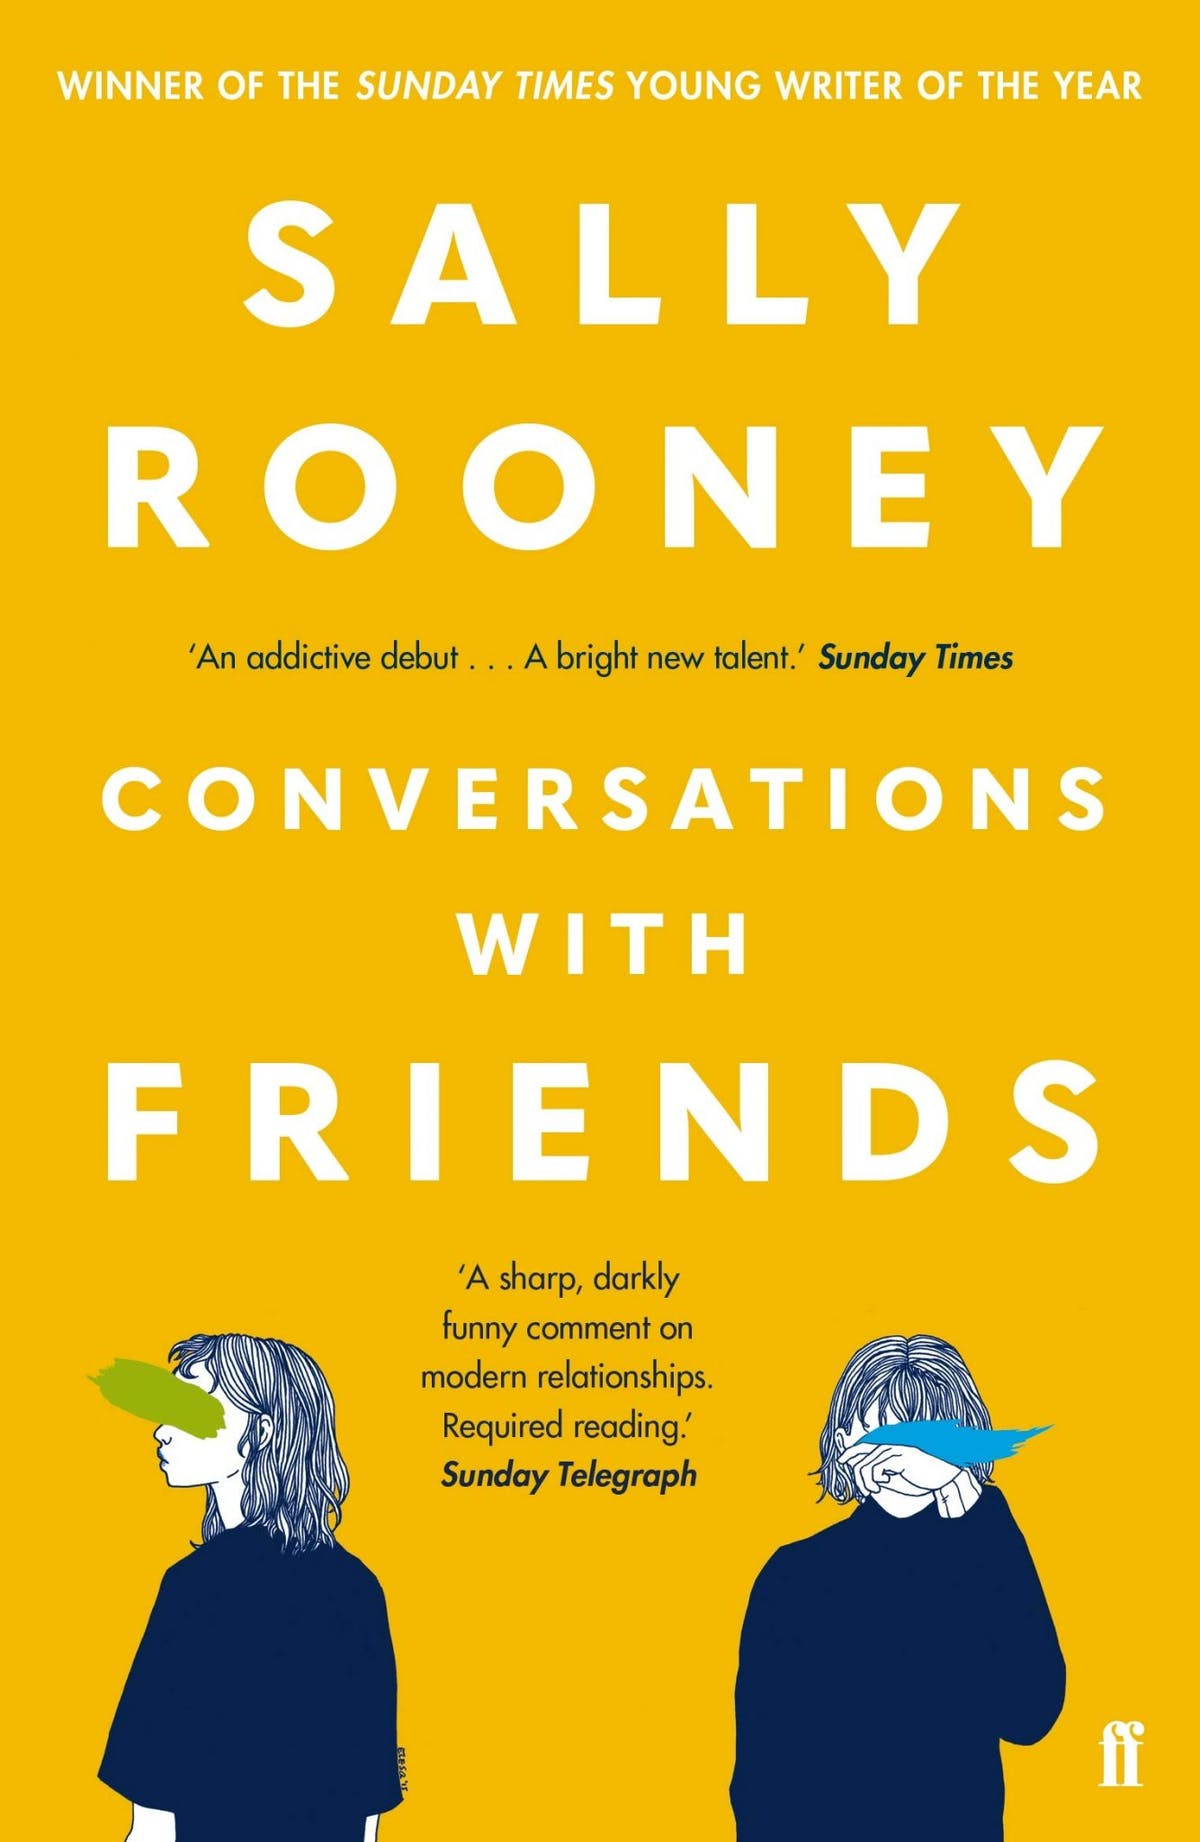 Conversations with Friends: the cast for Sally Rooney’s next TV series has been revealed